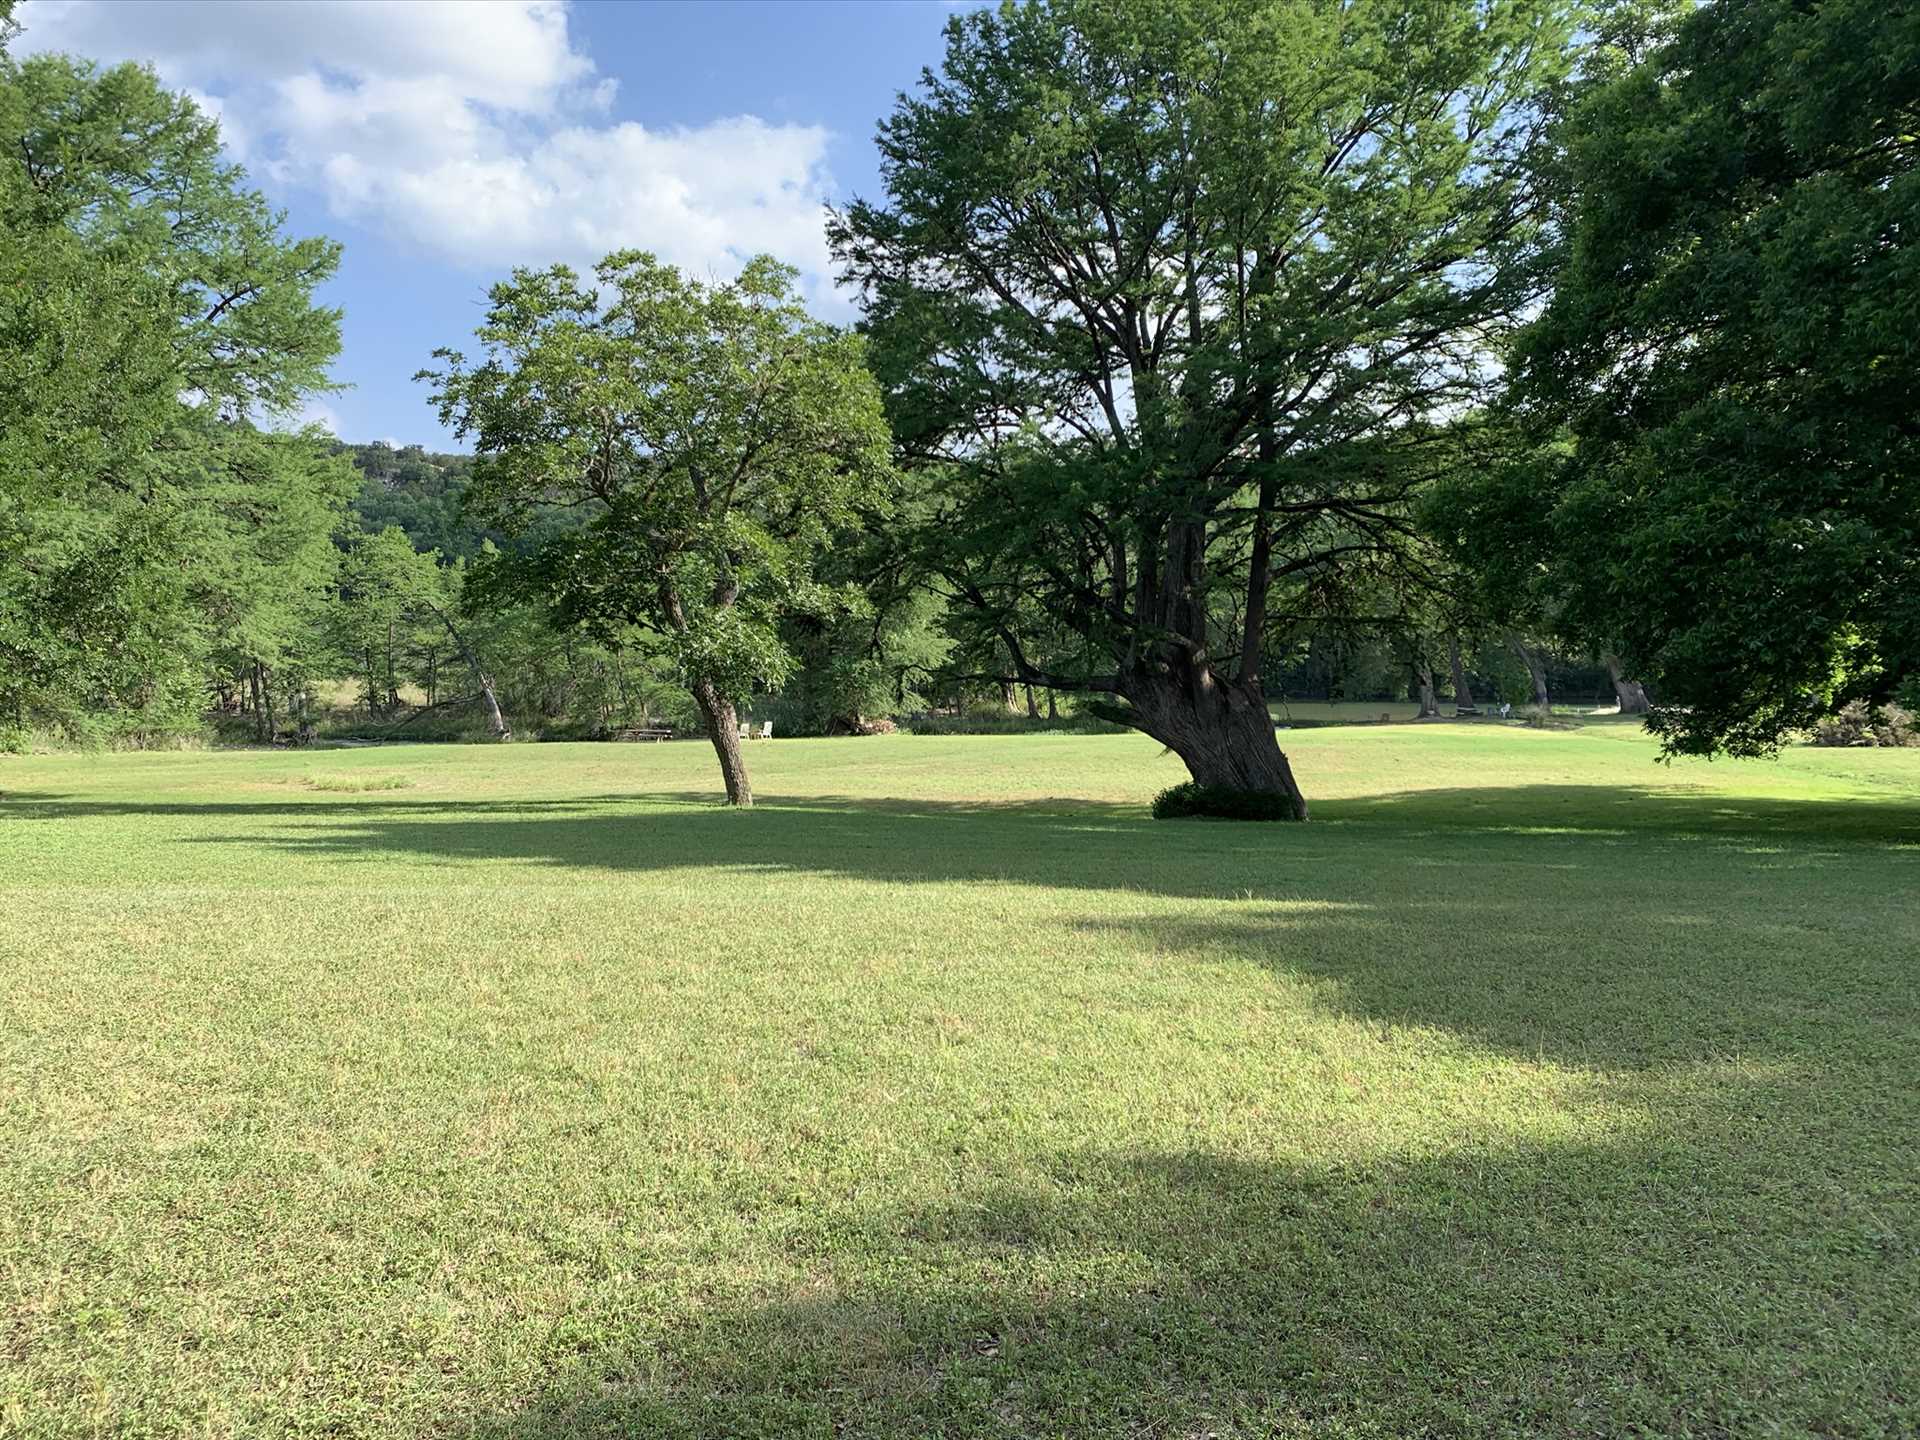                                                 Picturesque trees under the wide-open Texas skies provide a beautiful backdrop for photos, stargazing, wildlife watching, and more!